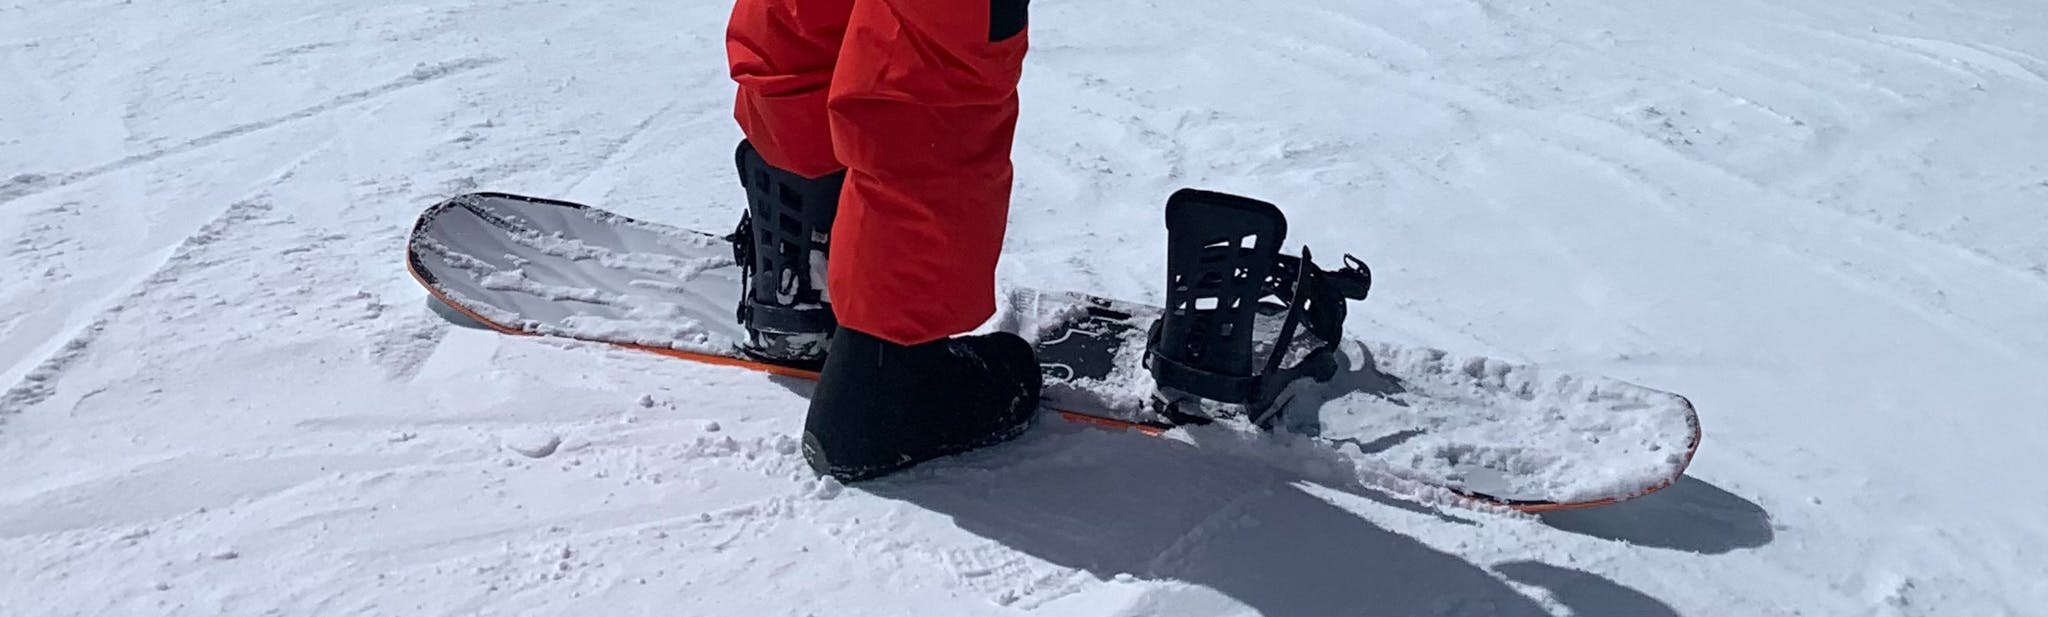 Expert Review: Union STR Snowboard Bindings 2022 | Curated.com